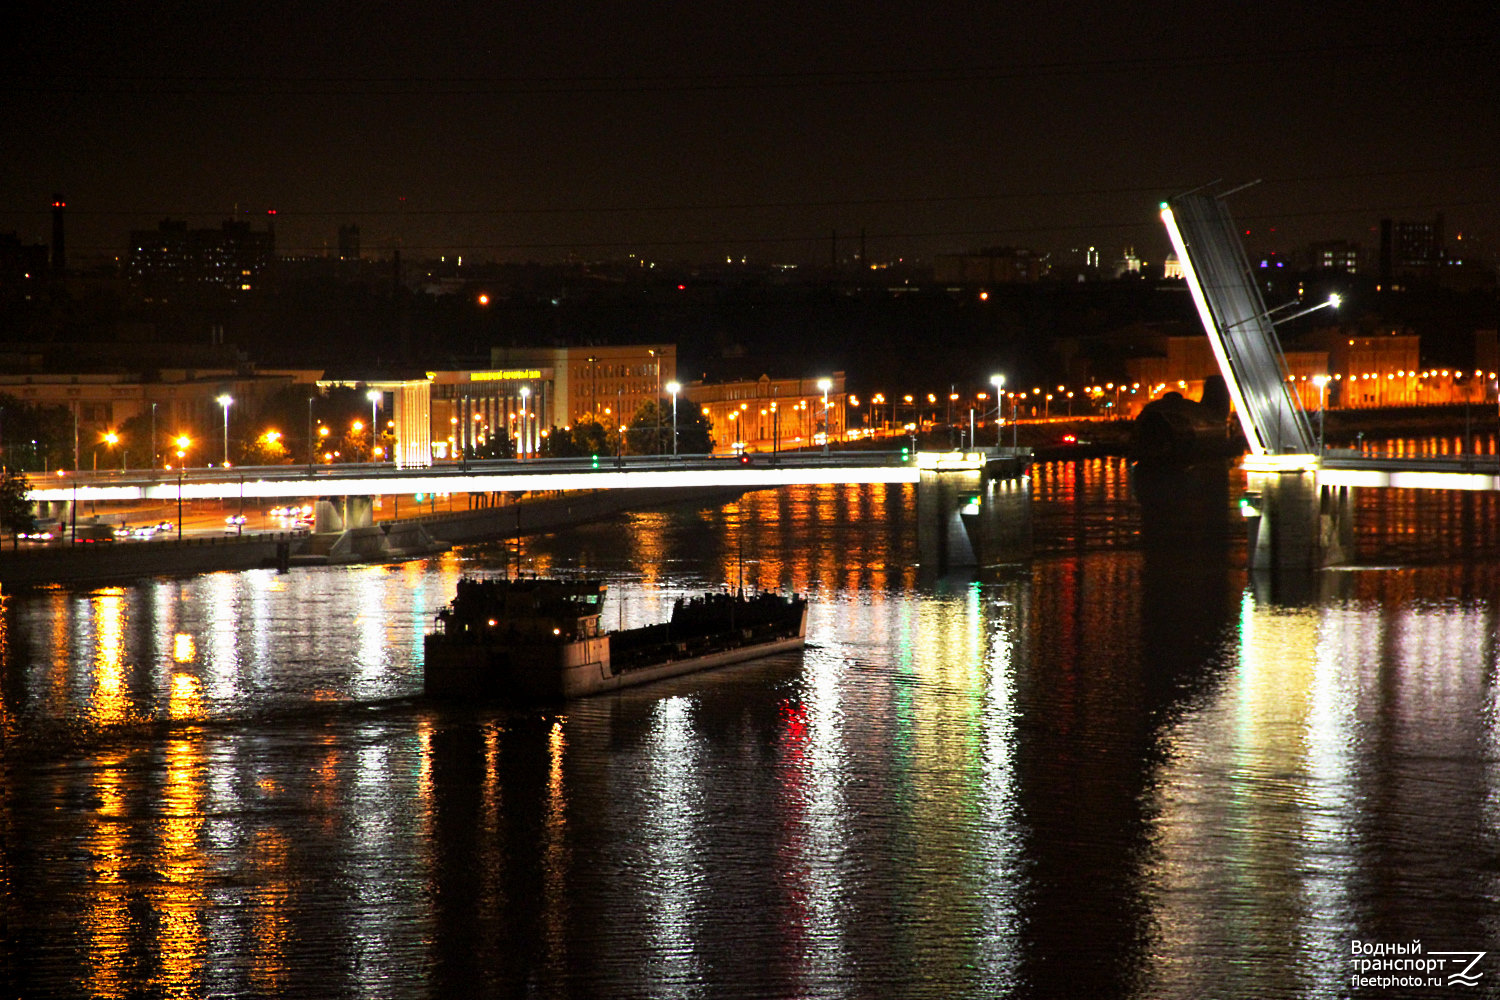 Neva River, Water Paths Infrastructure